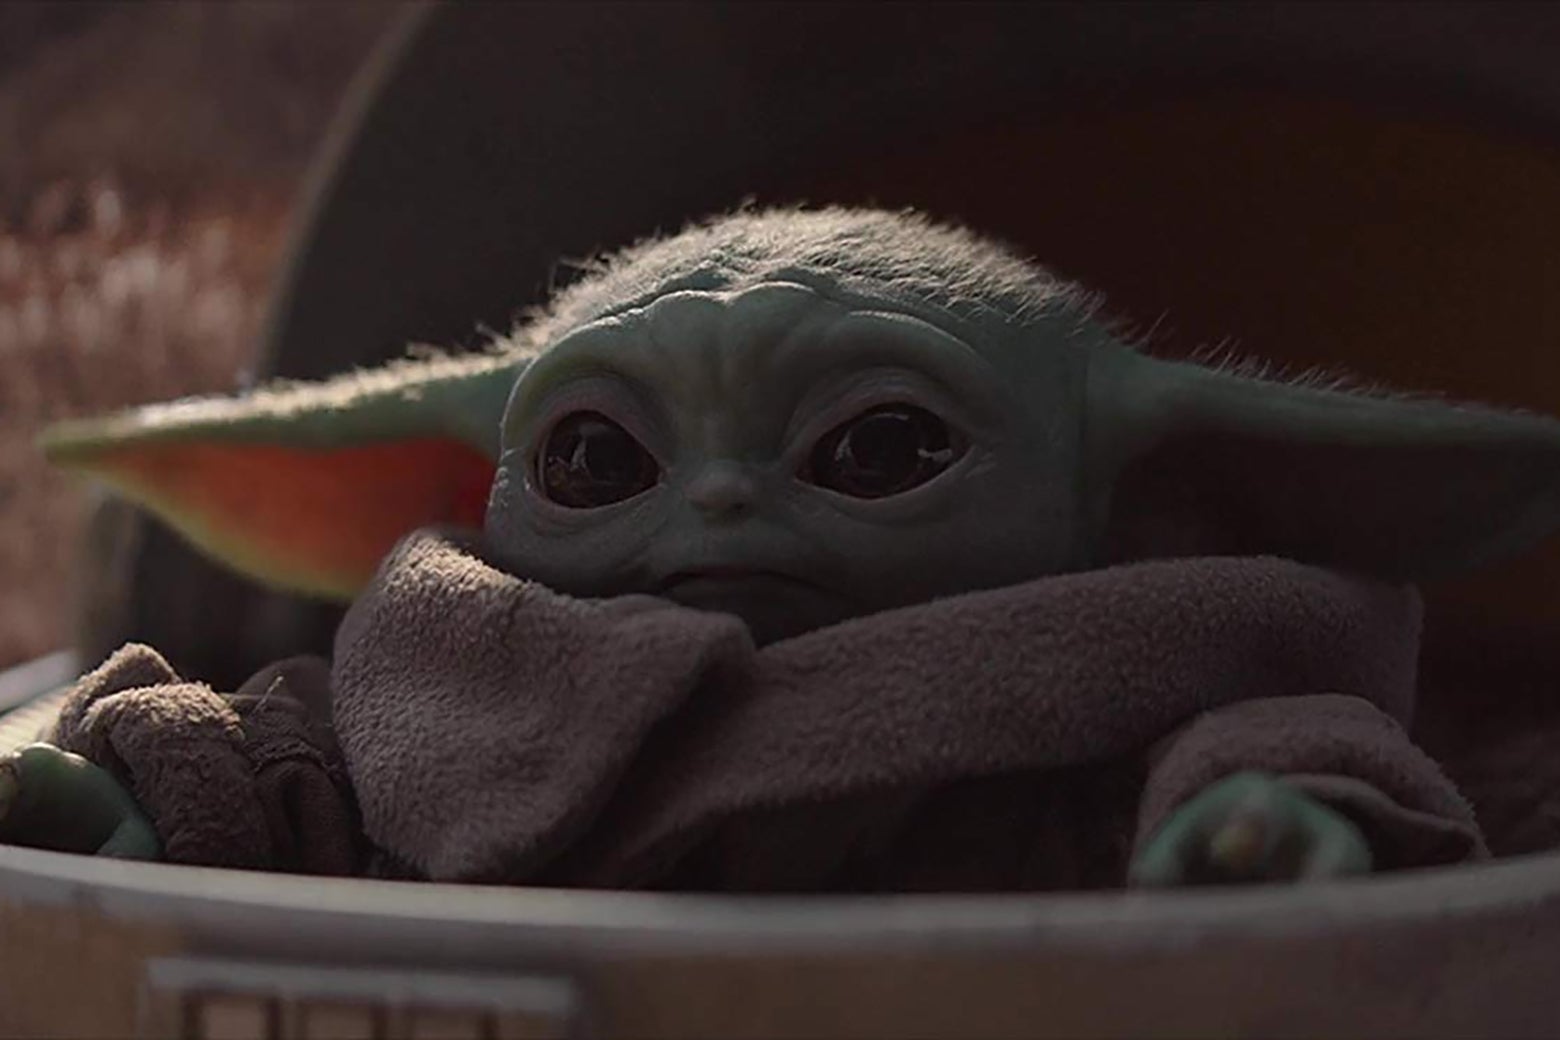 The adorable Baby Yoda creature from the Mandalorian, poking its head up from its pram.